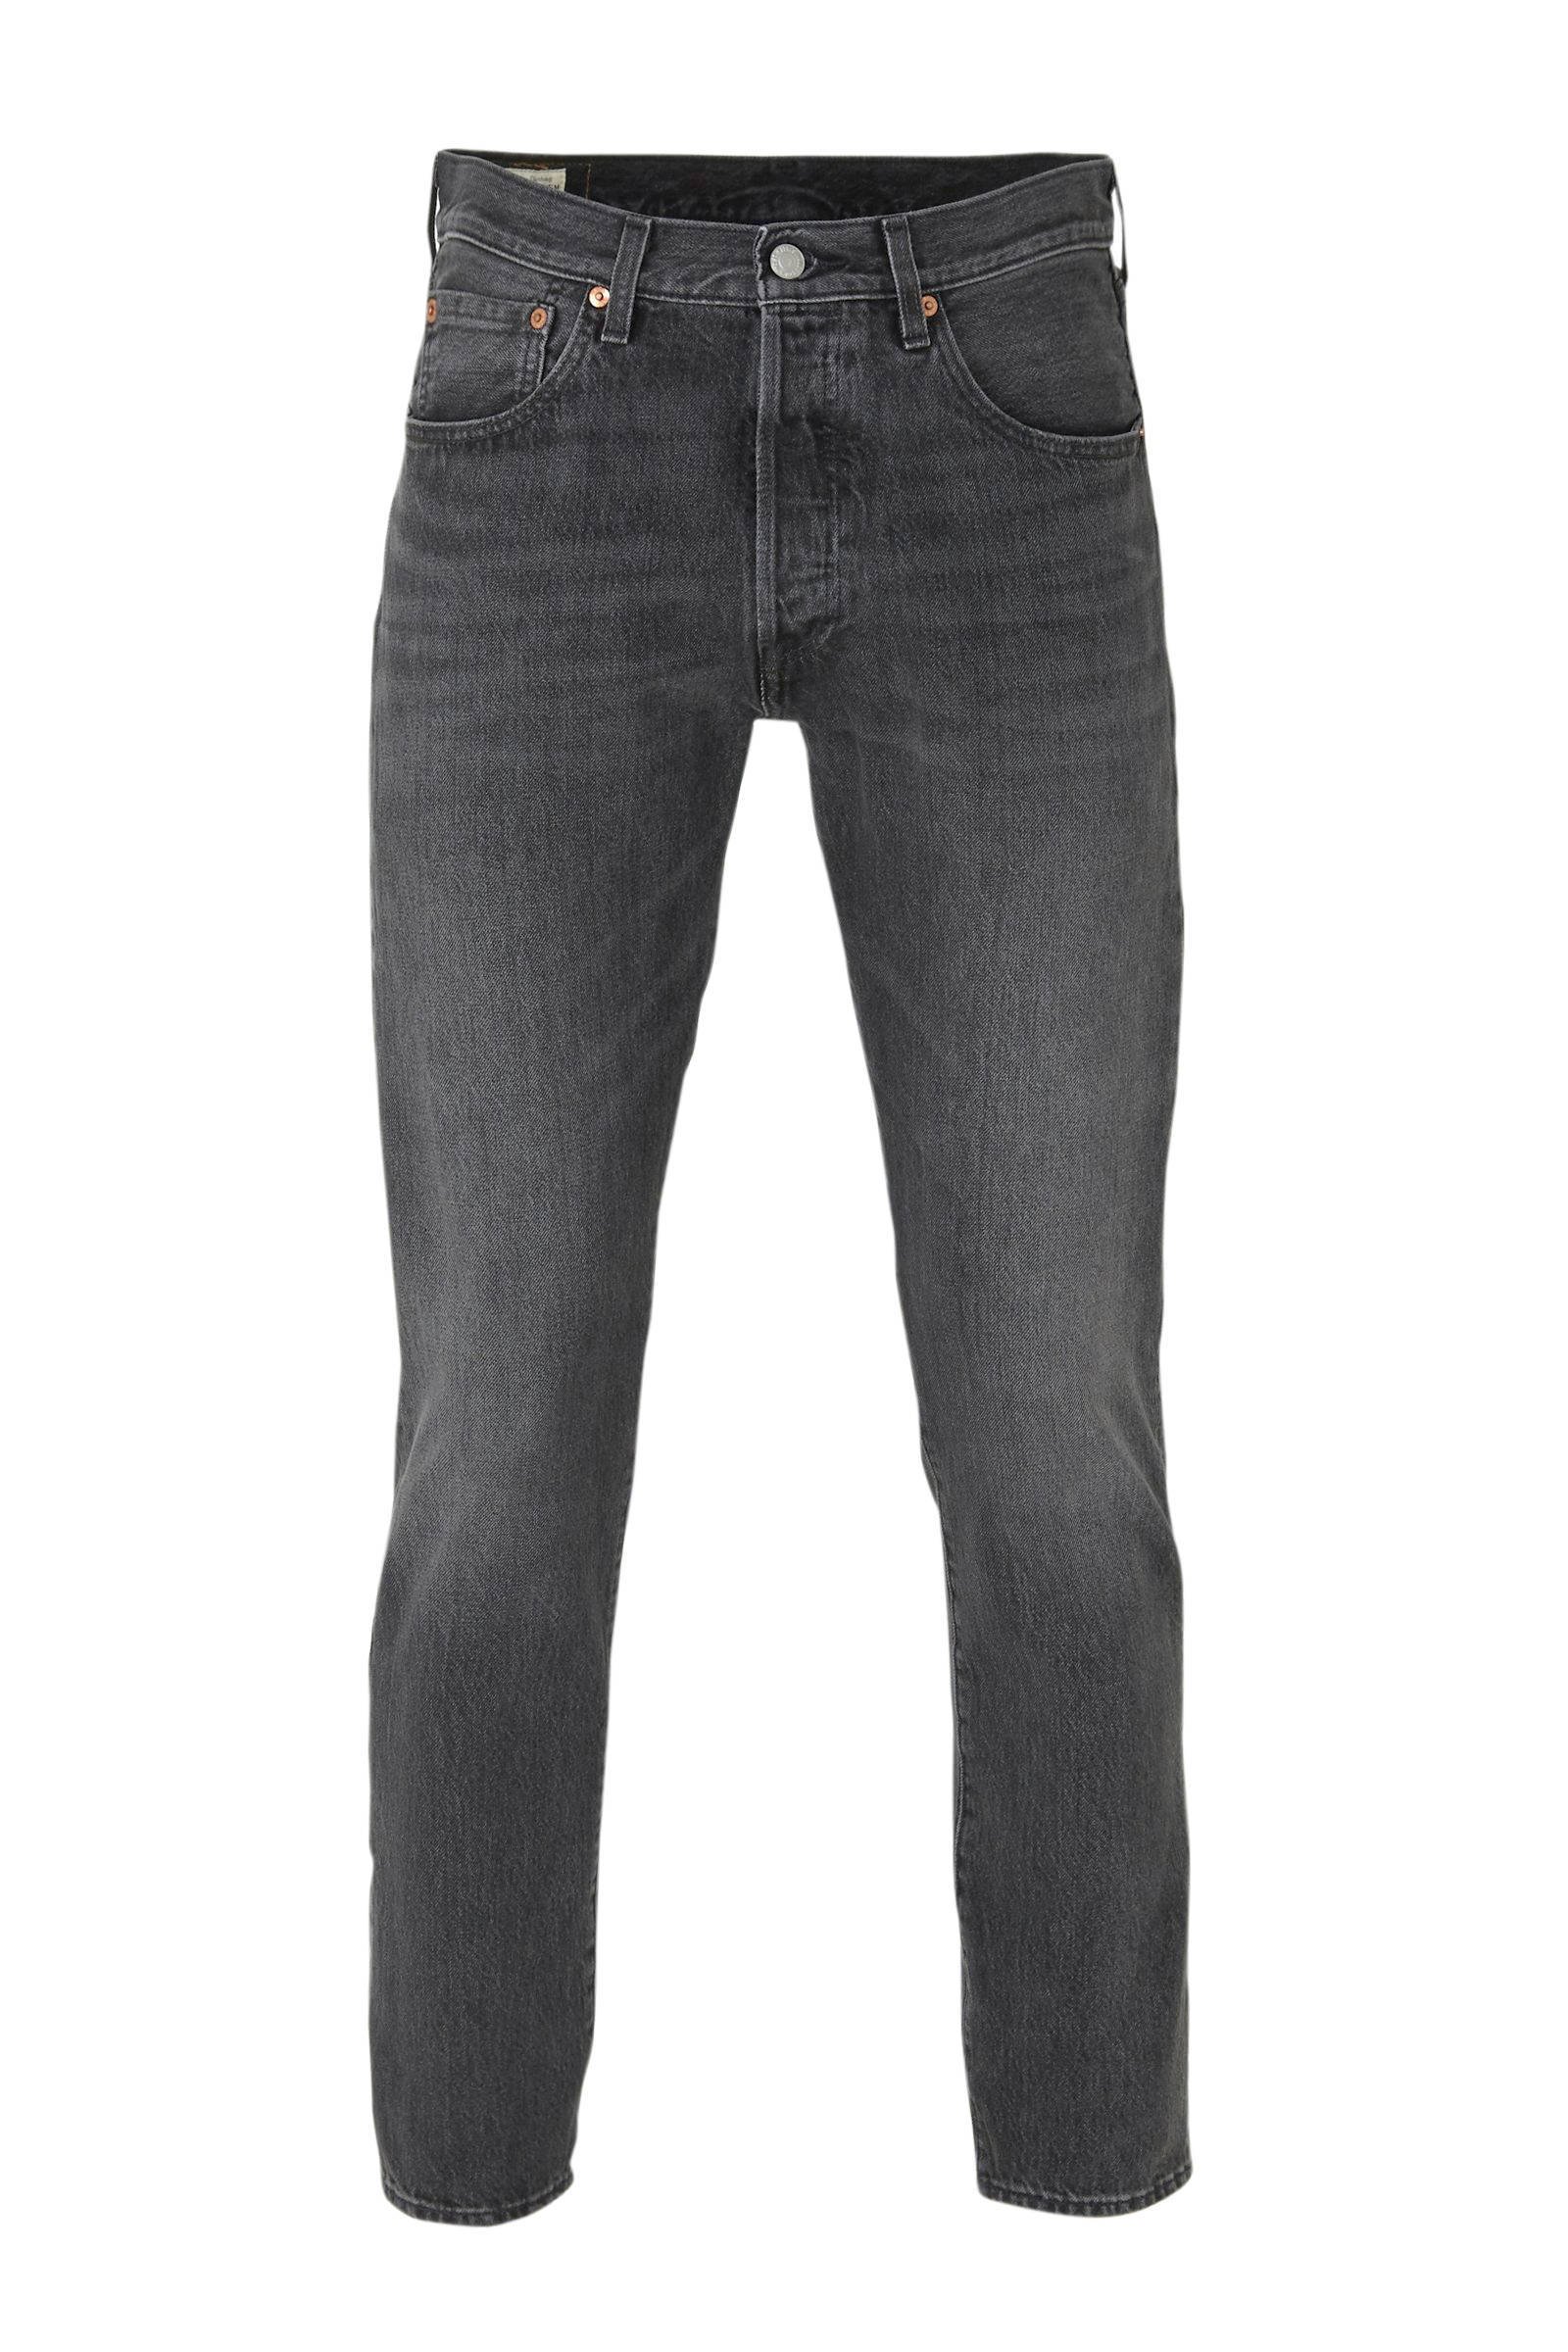 Levi's slim tapered fit jeans 501 just 